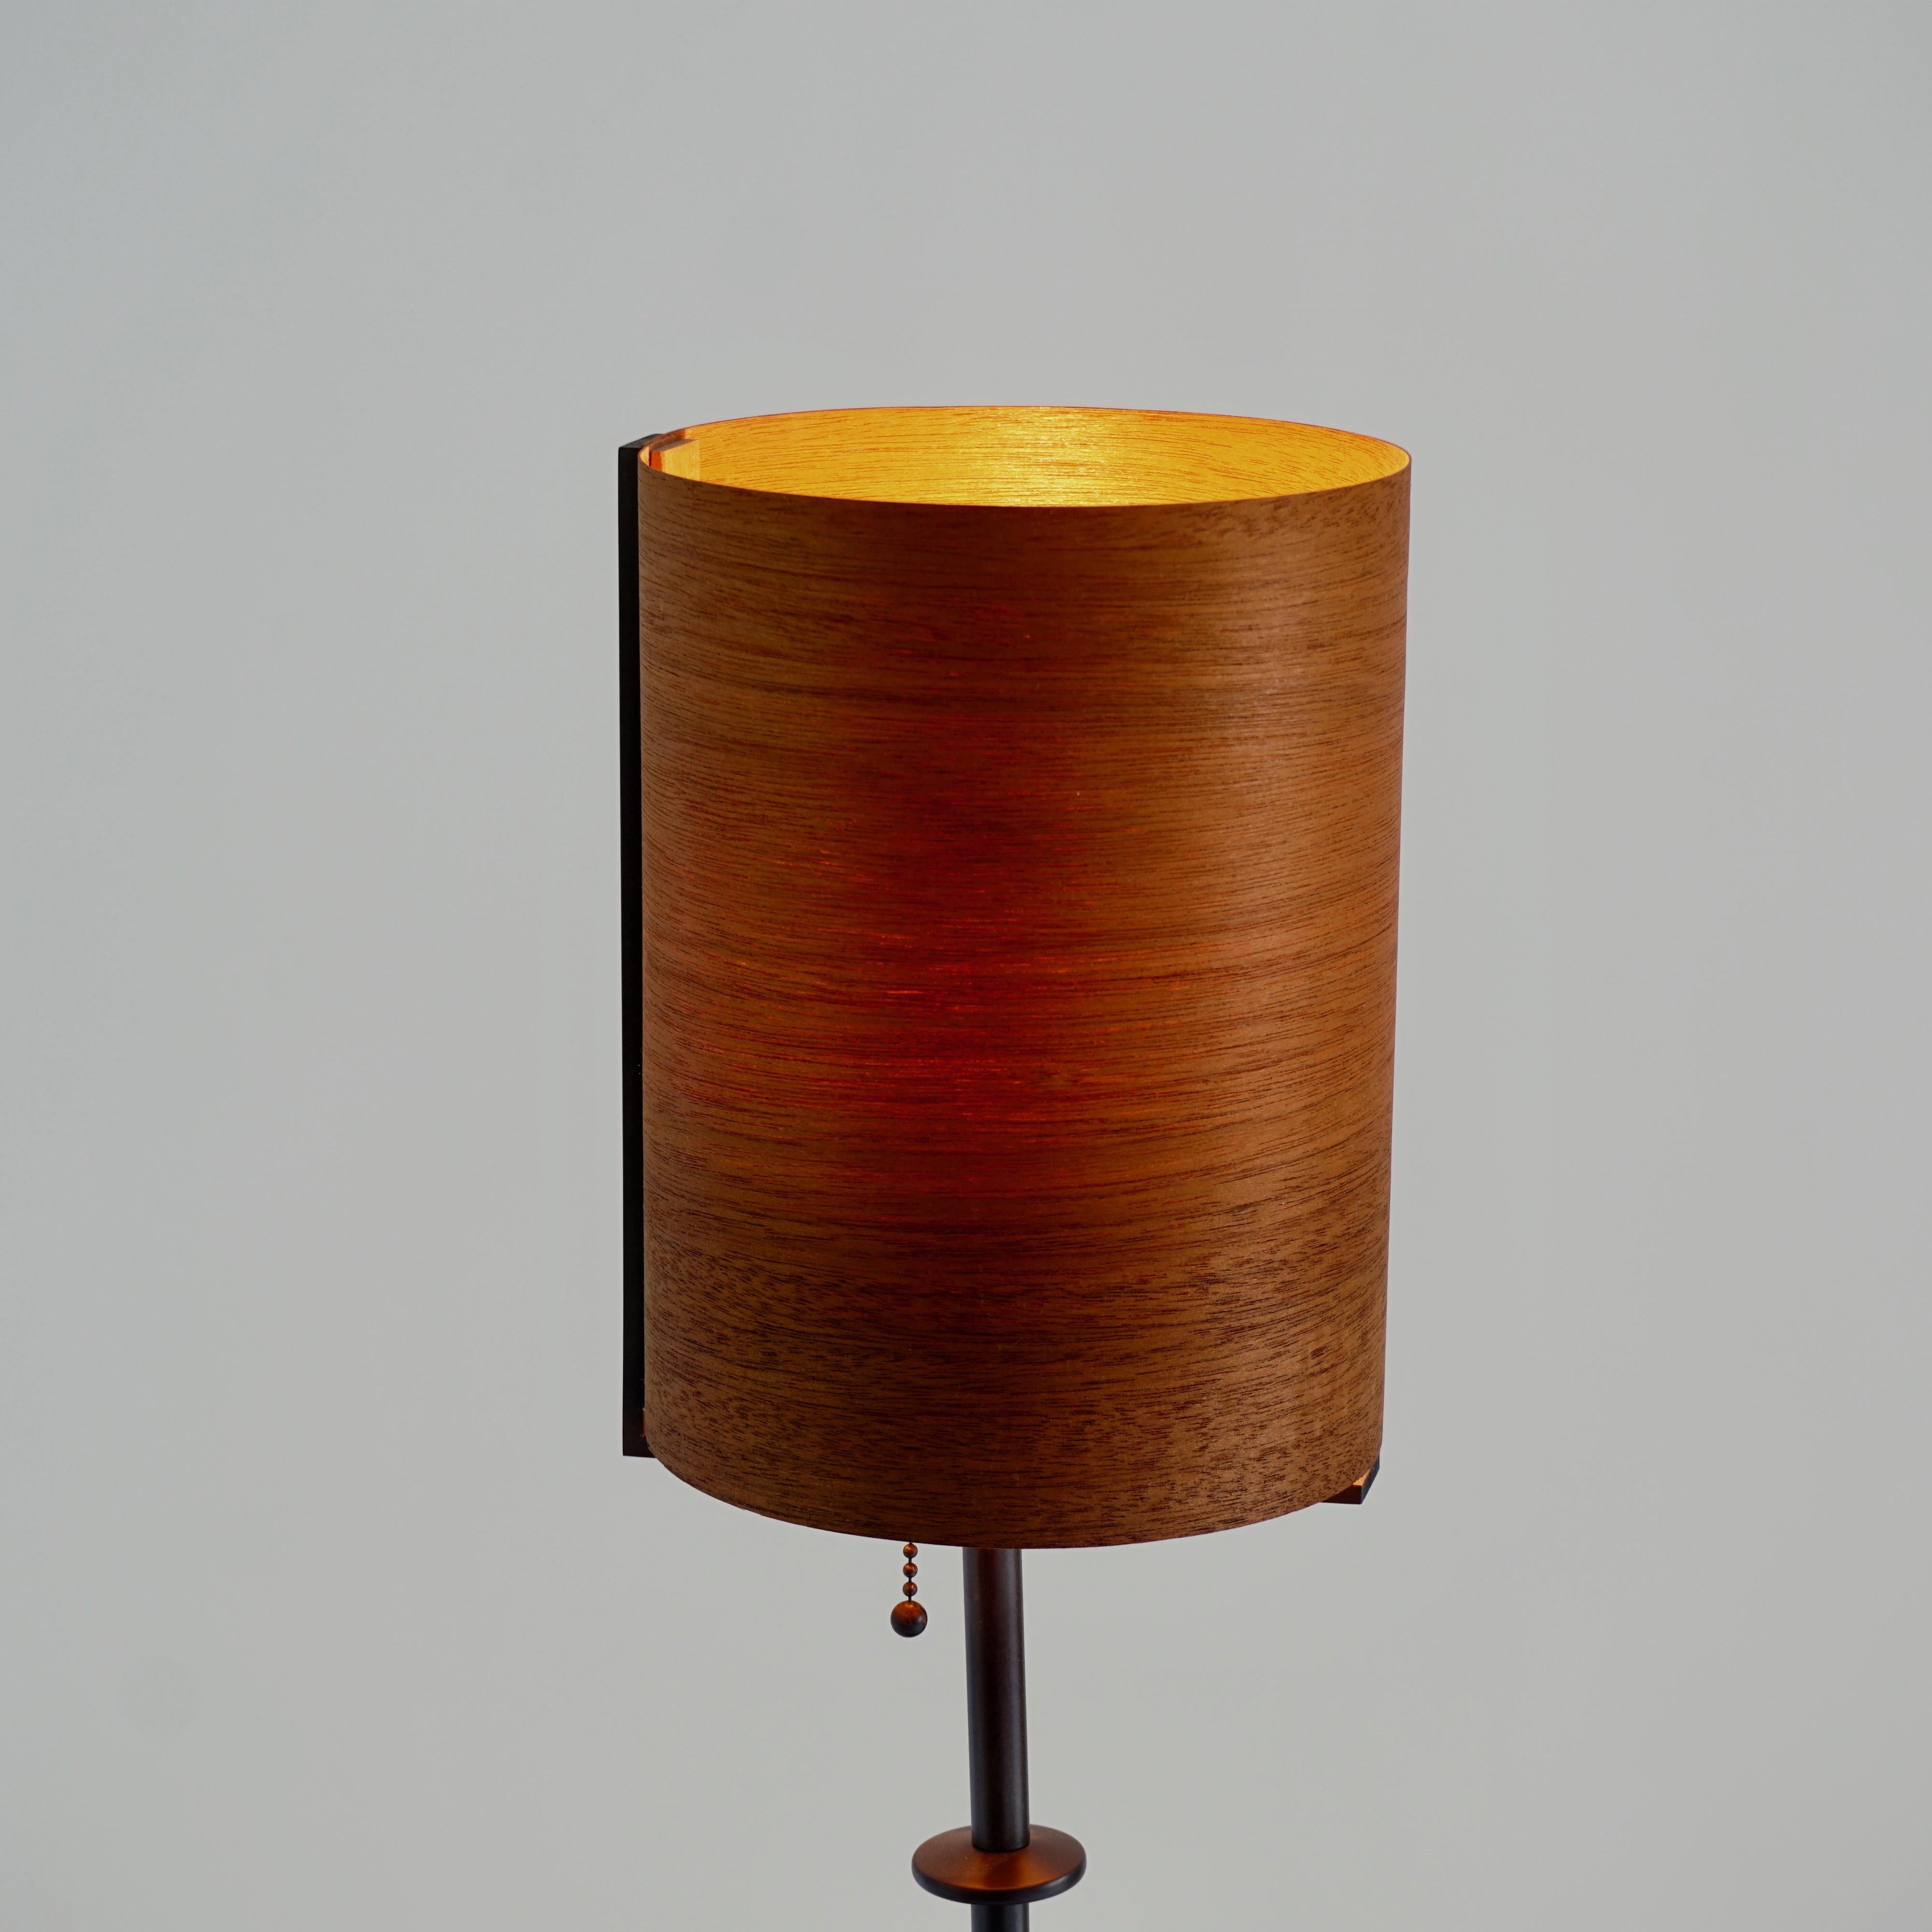 Mahogany Wood Veneer Table Lamp #2 with Blackened Bronze Frame For Sale 2